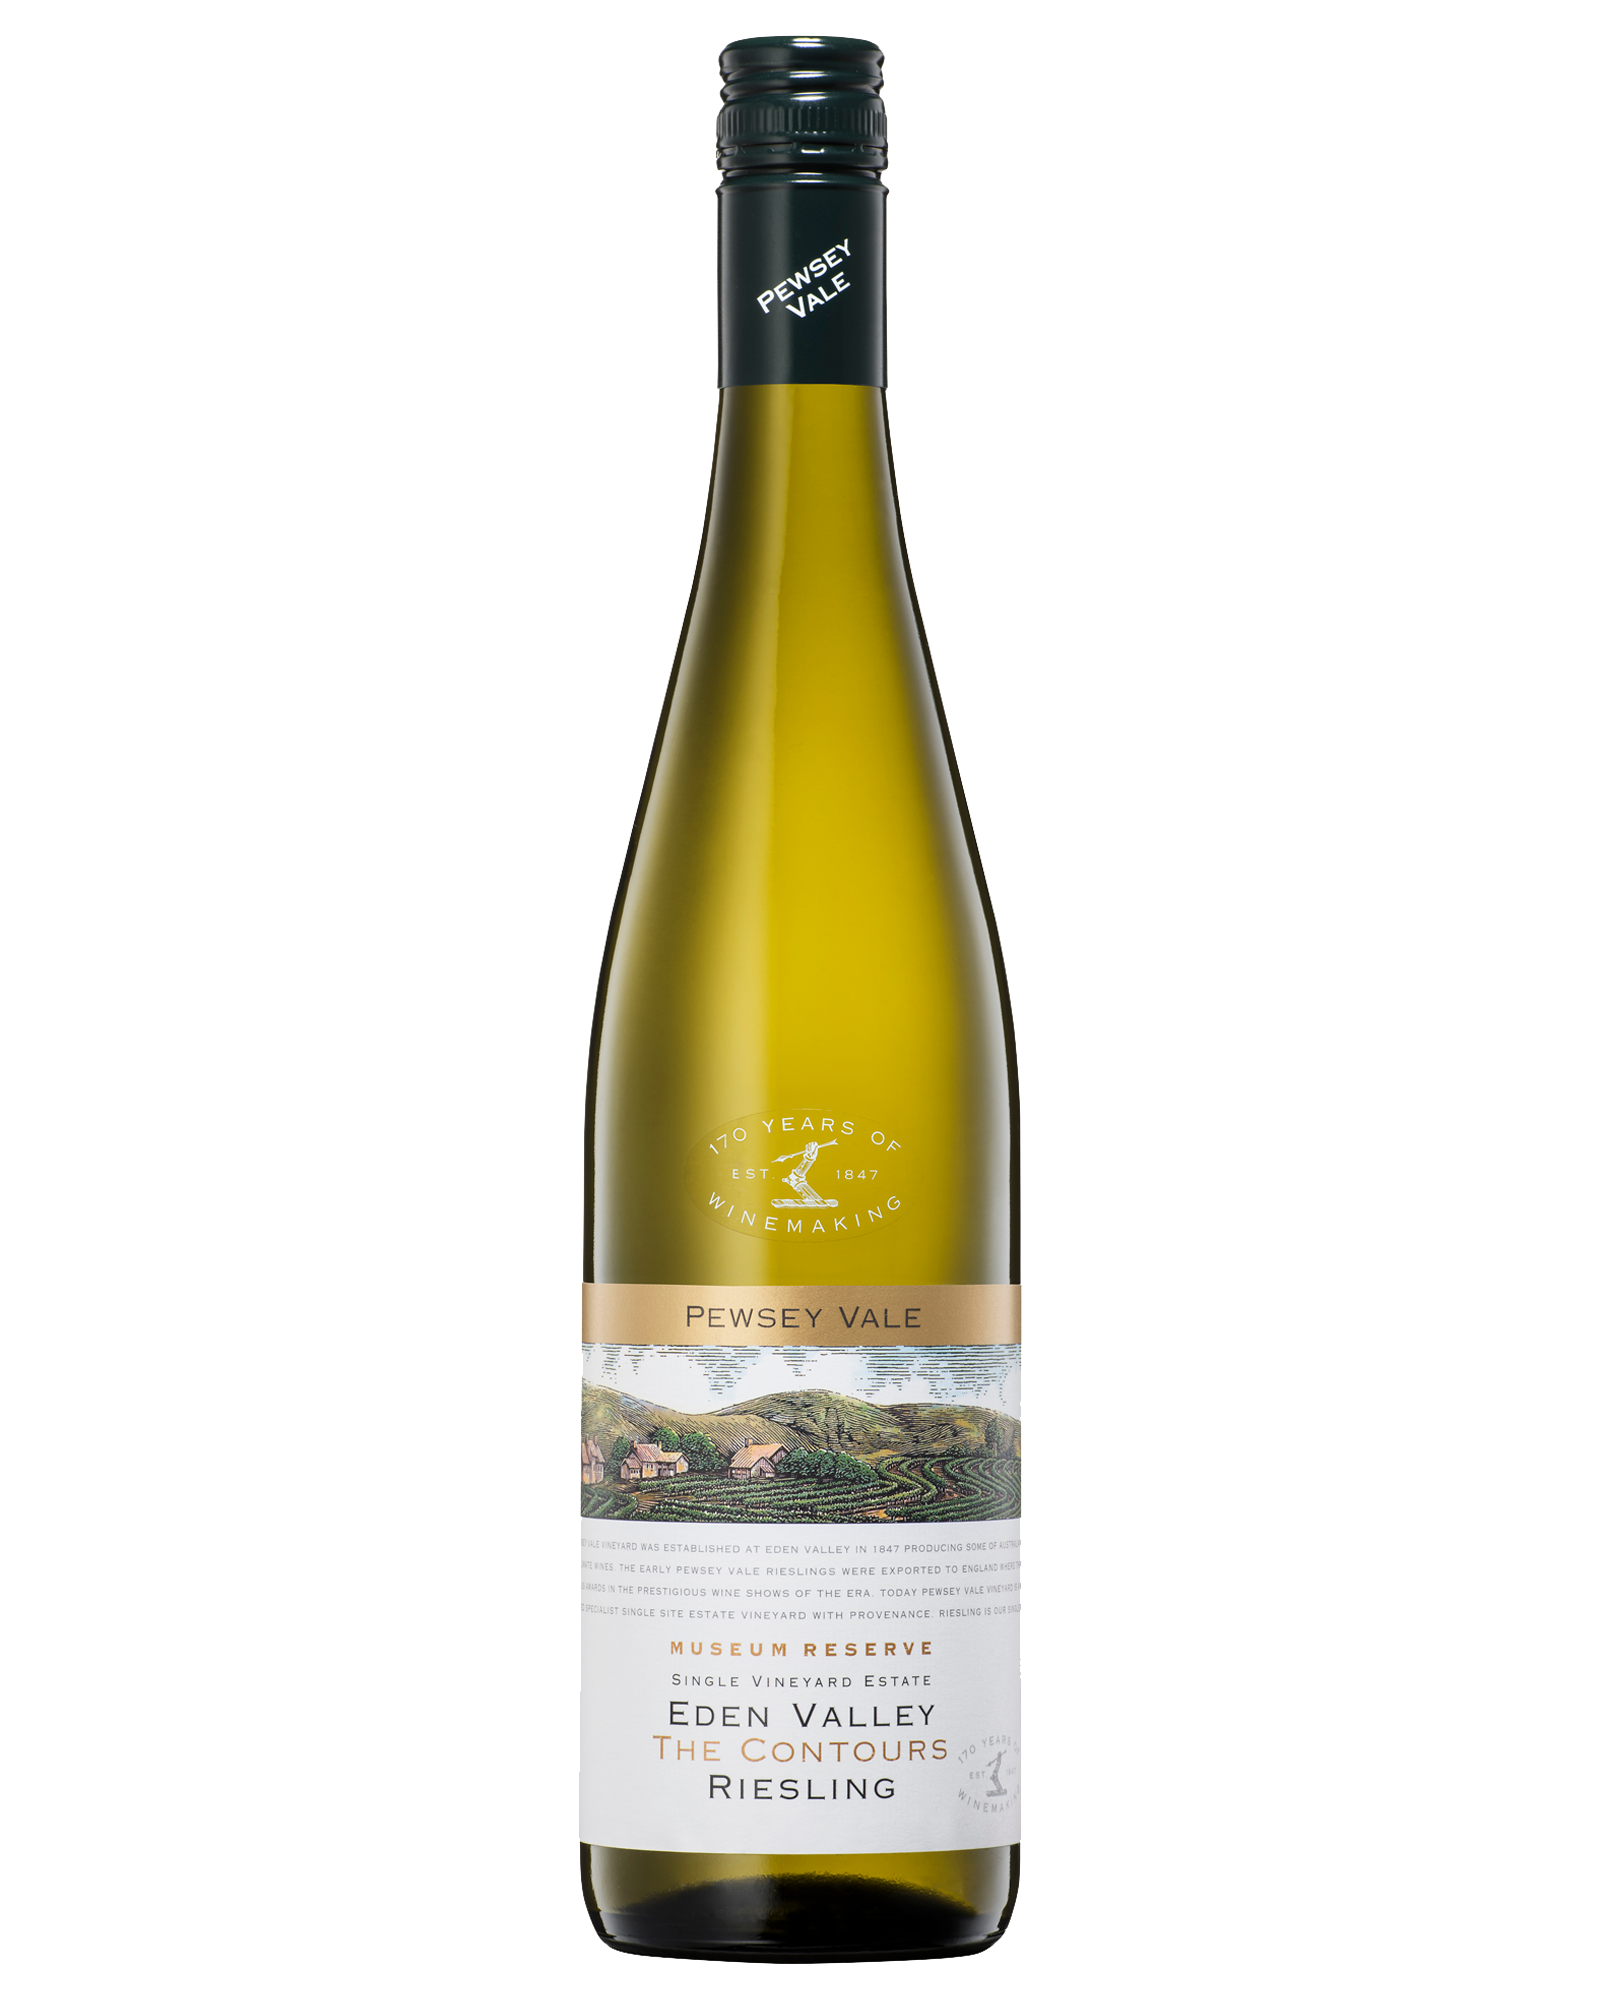 Pewsey Vale The Contours Riesling 2013